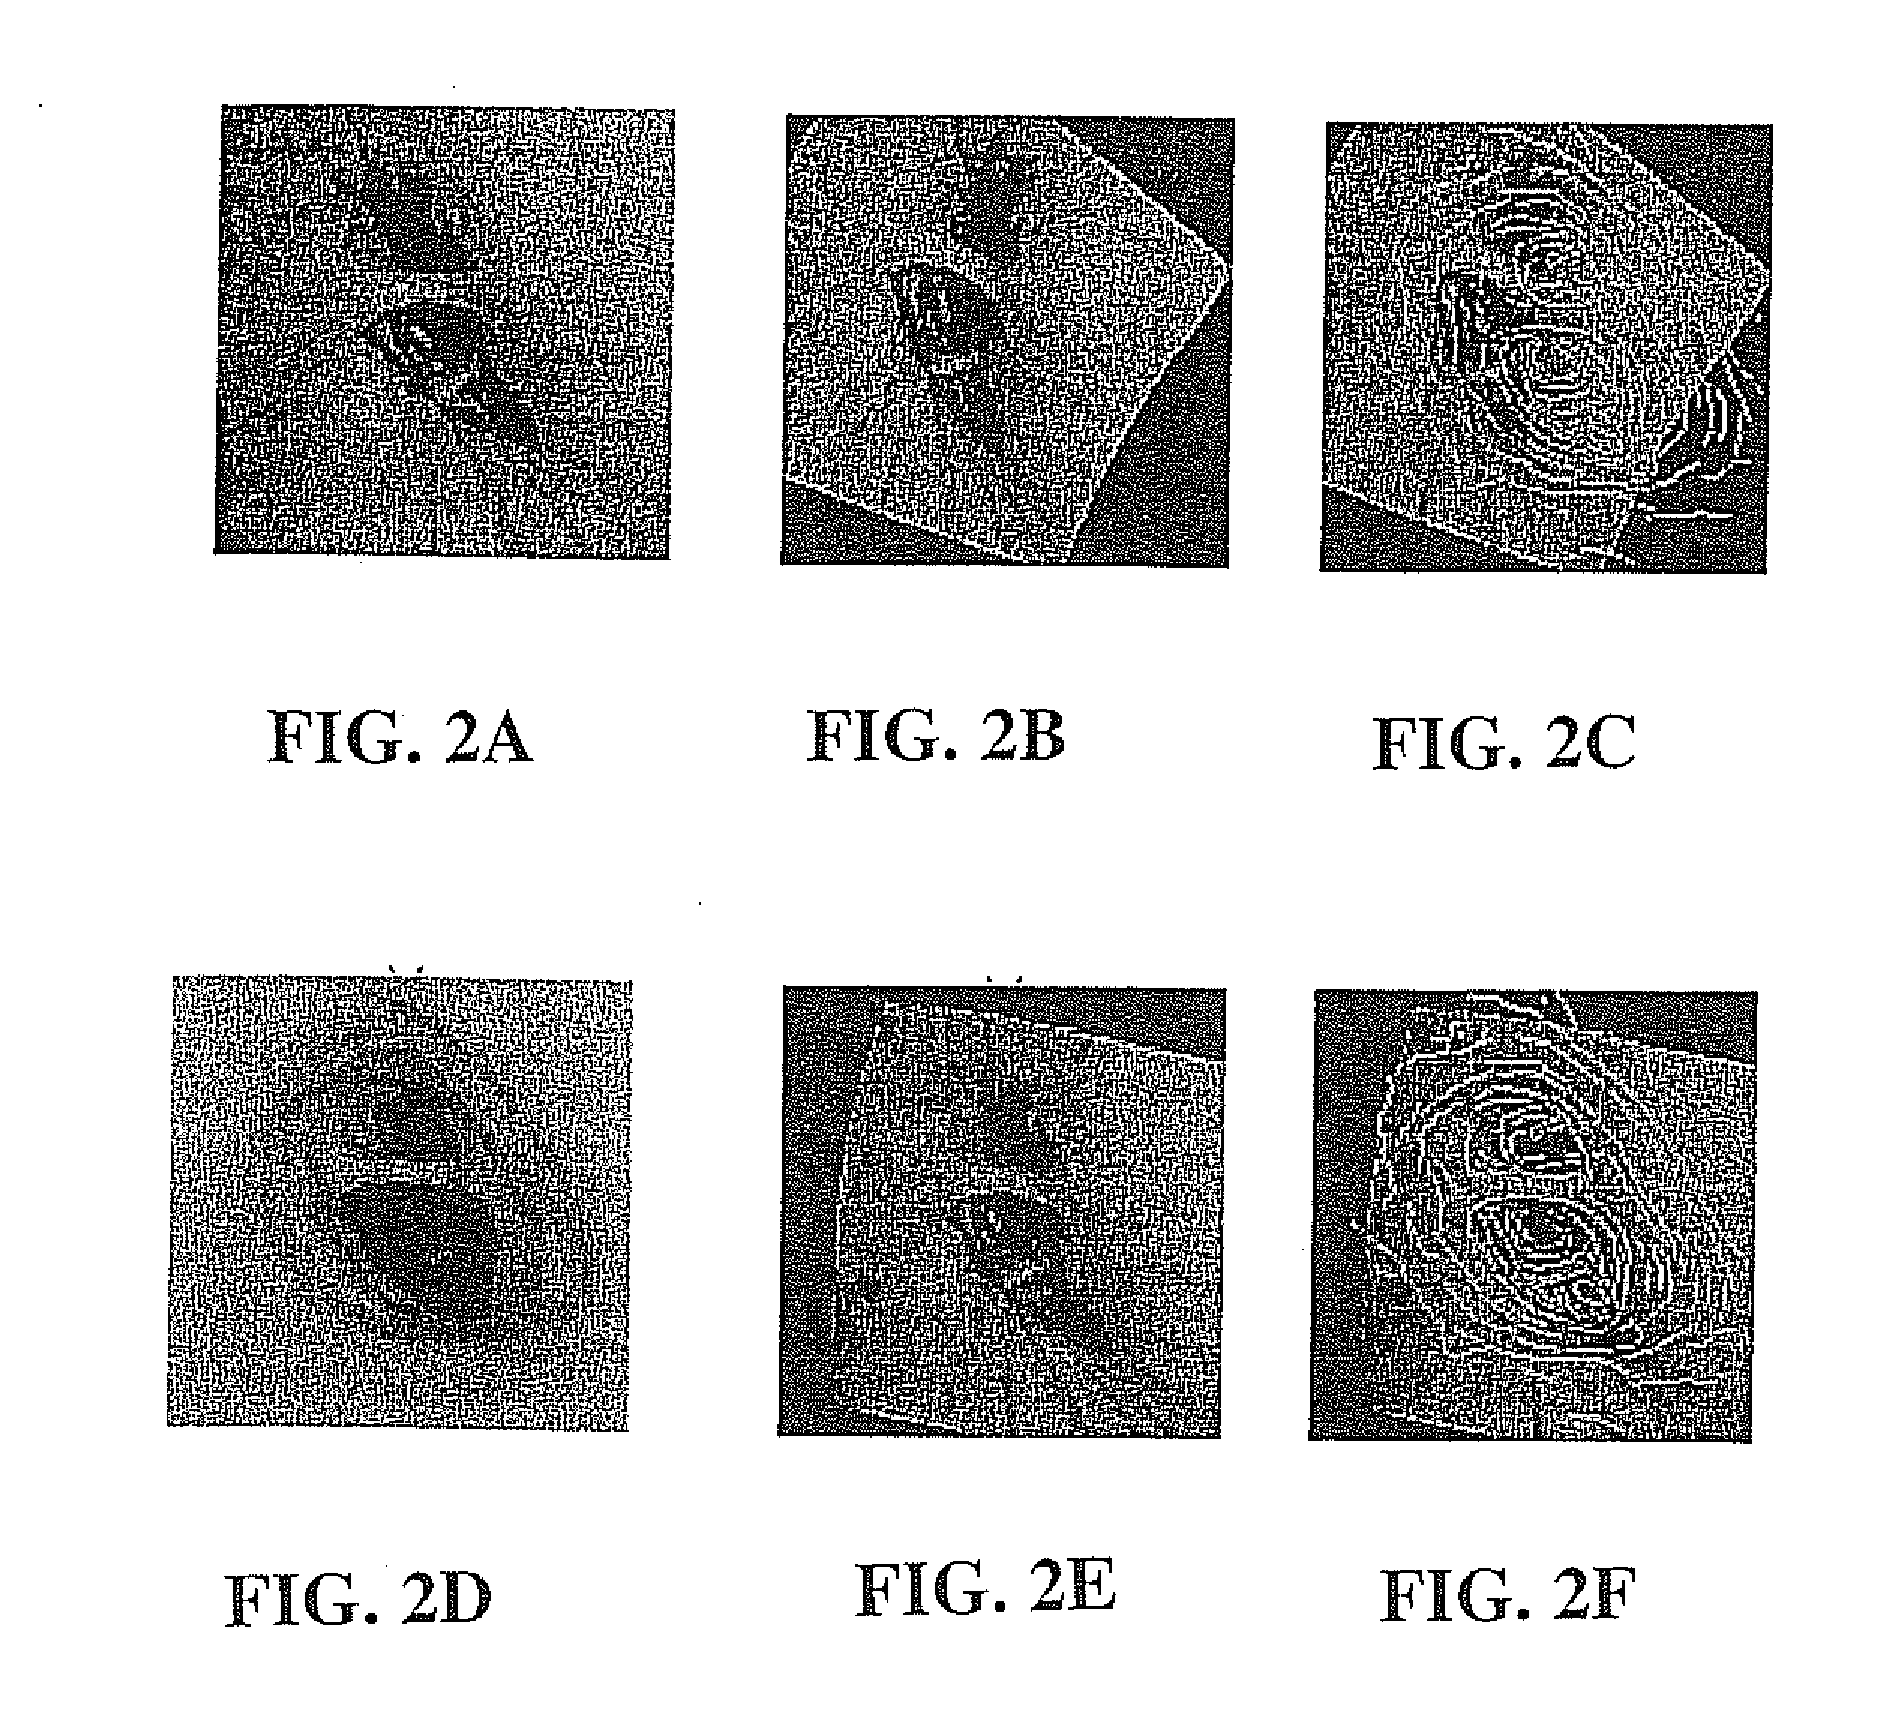 Fast 3d-2d image registration method with application to continuously guided endoscopy